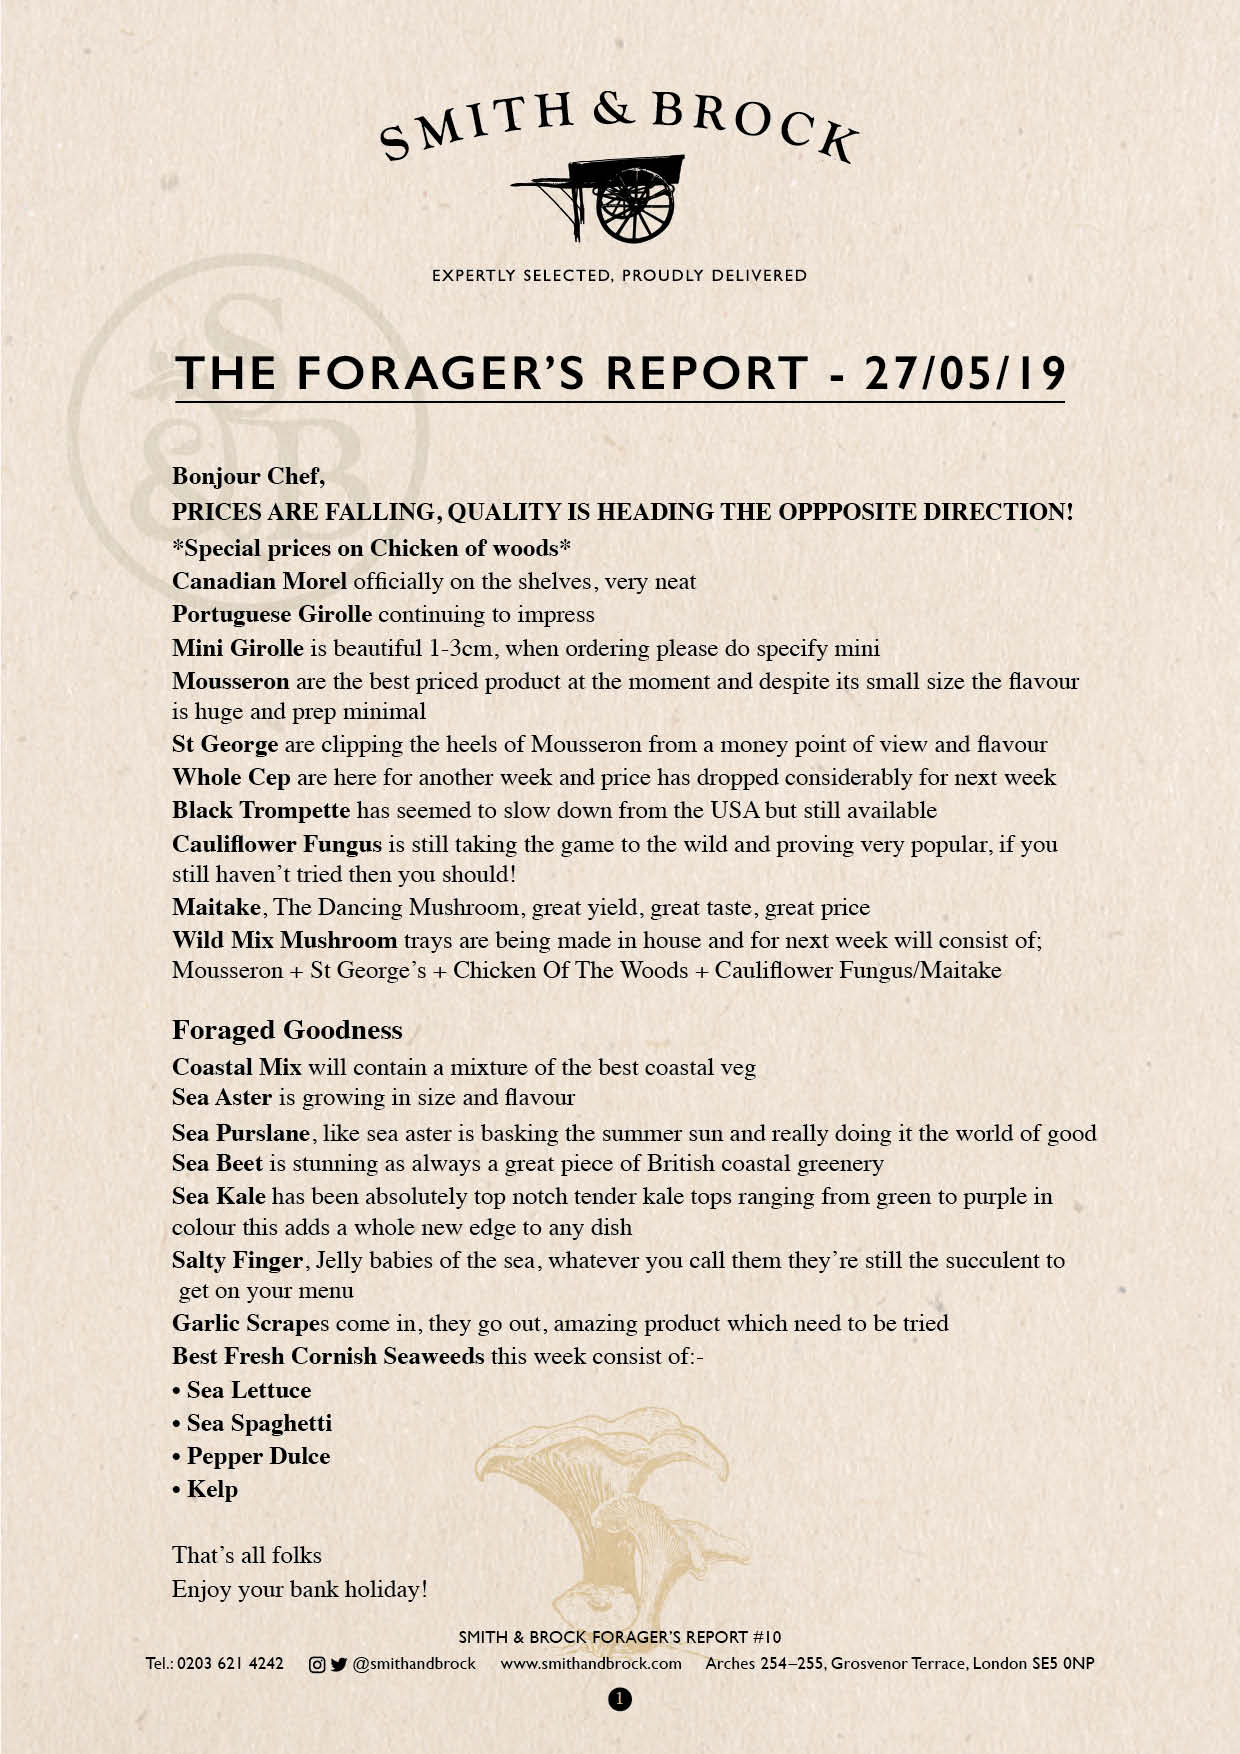 Smith&Brock Foraged Products Report 27 May 2019 10